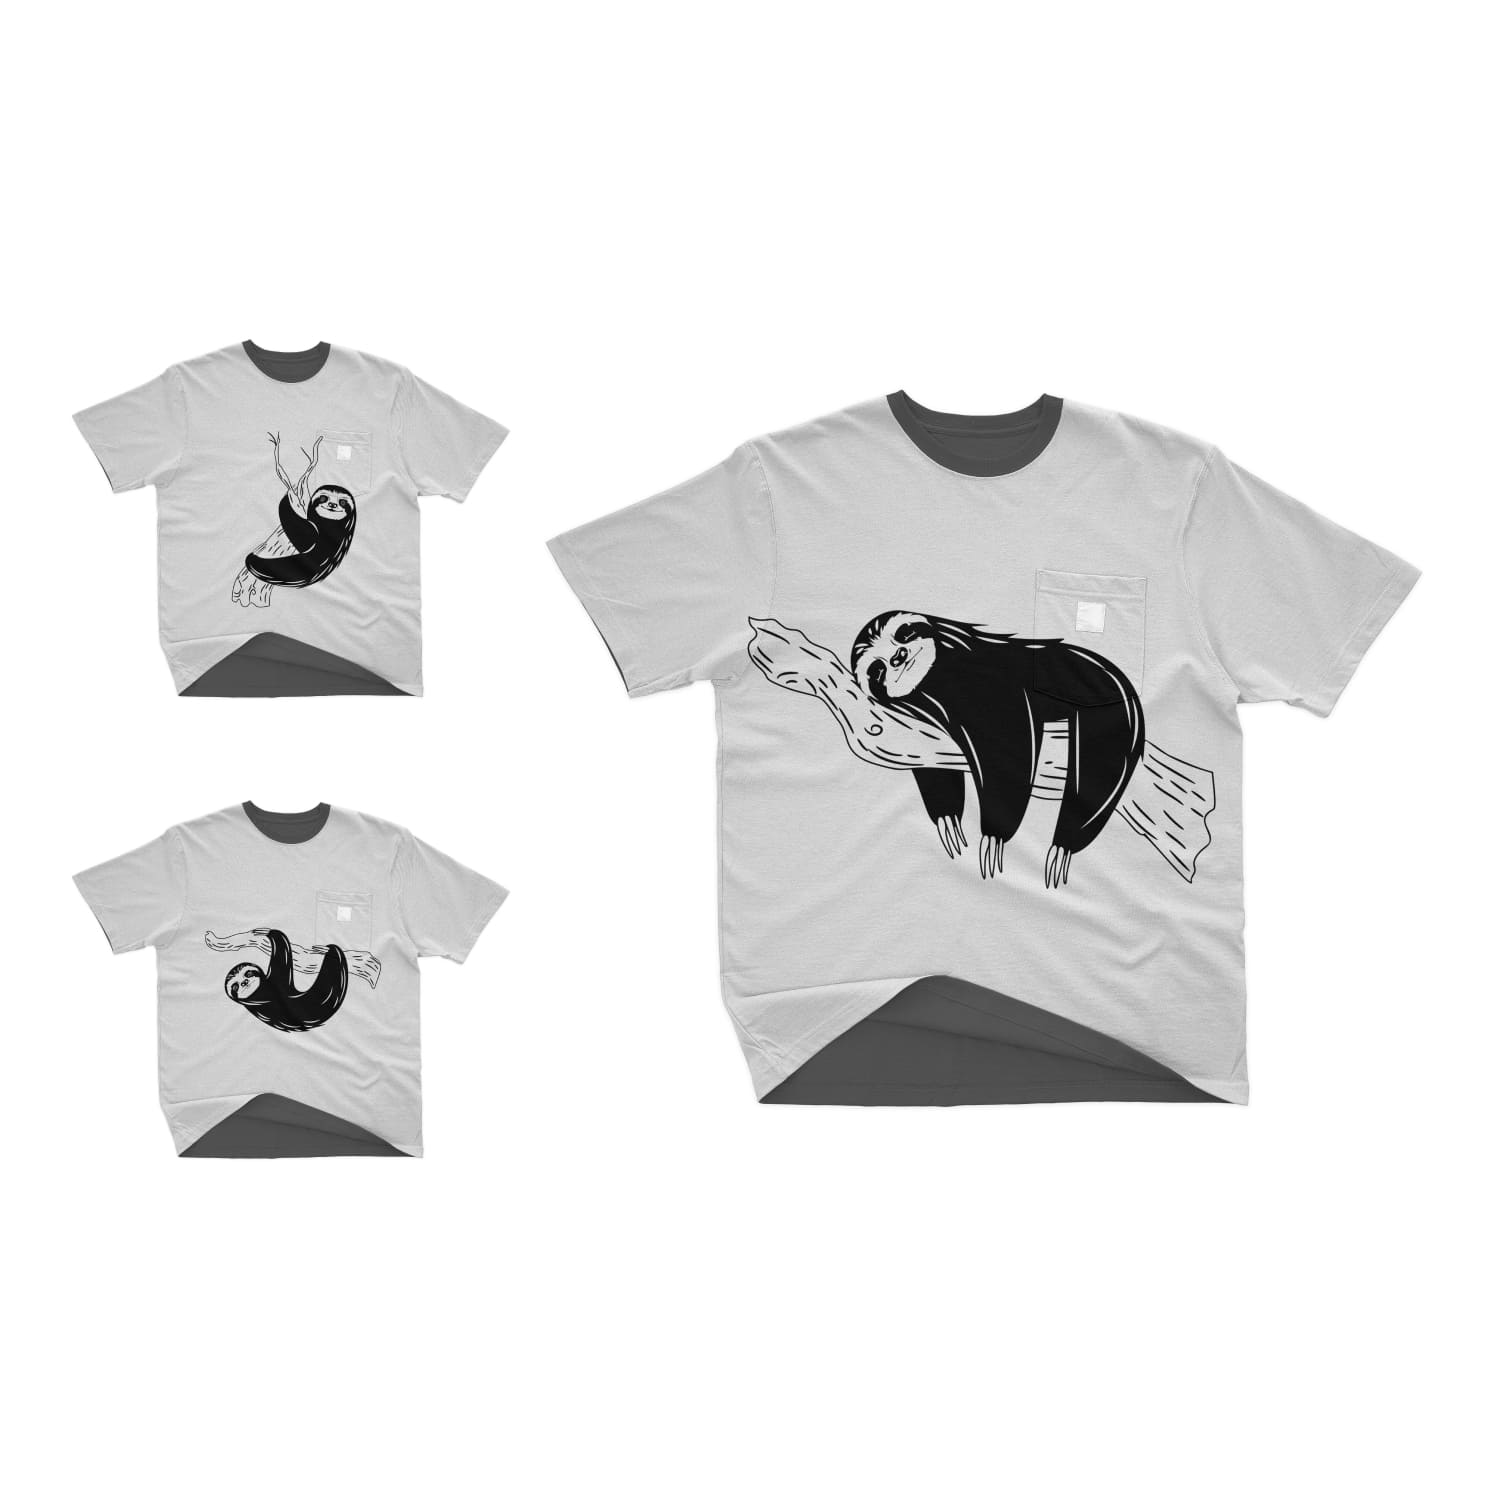 A pack of t-shirts with an irresistible black and white sloth print.